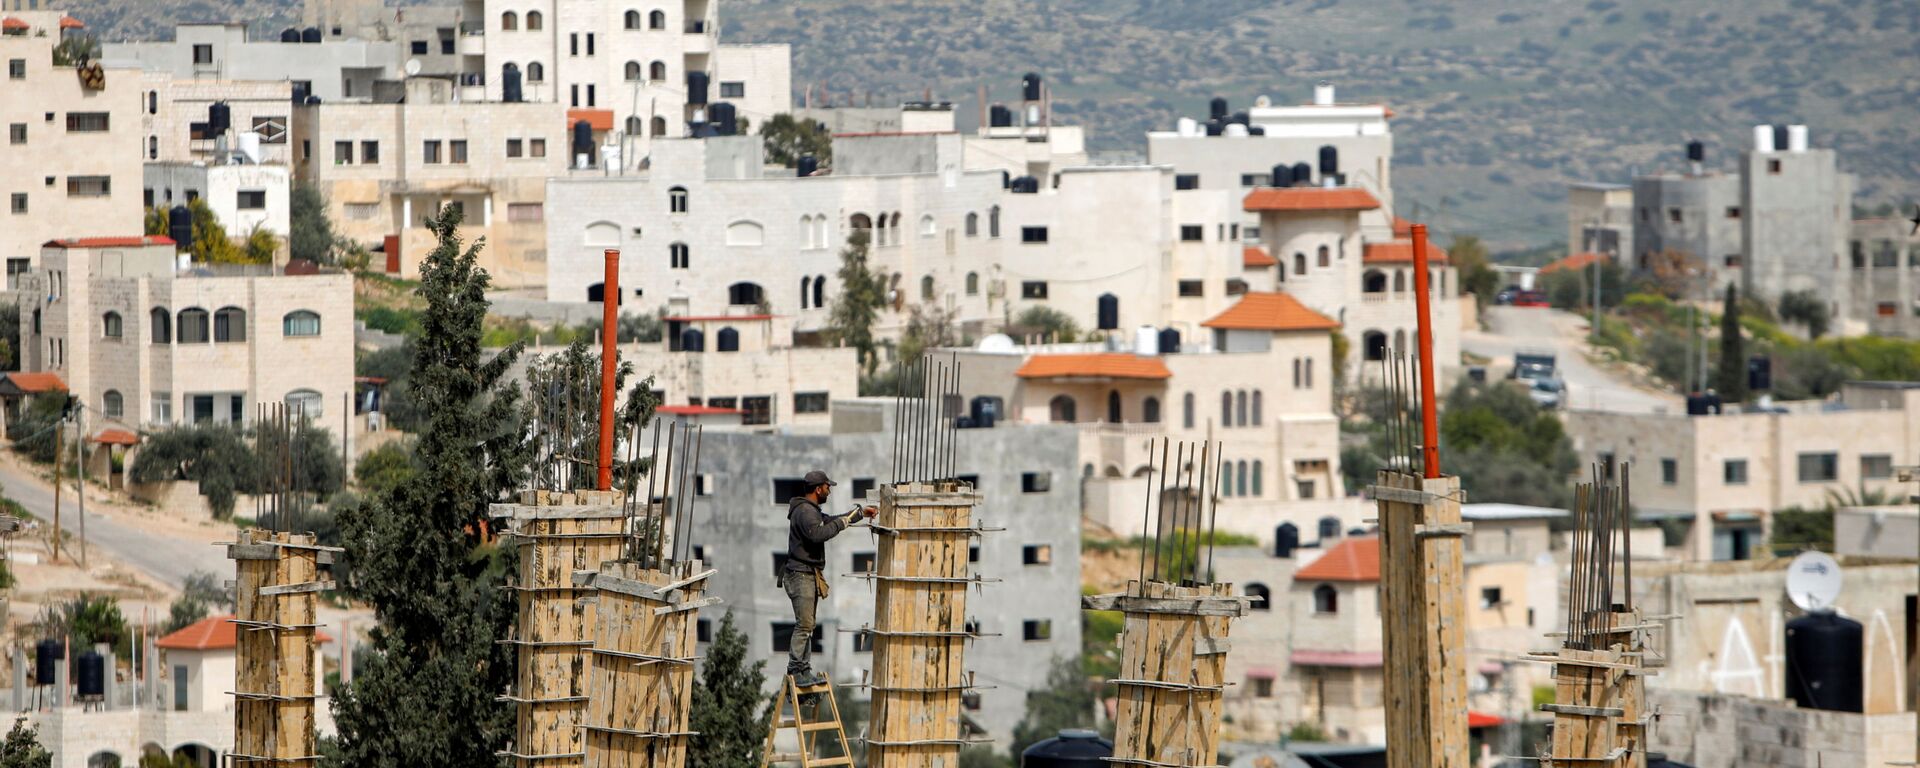 A Palestinian laborer works at the construction site of a house during a lockdown imposed to prevent the spread of the coronavirus disease (COVID-19), in Tubas in the Israeli-occupied West Bank March 15, 2021 - Sputnik International, 1920, 27.10.2021